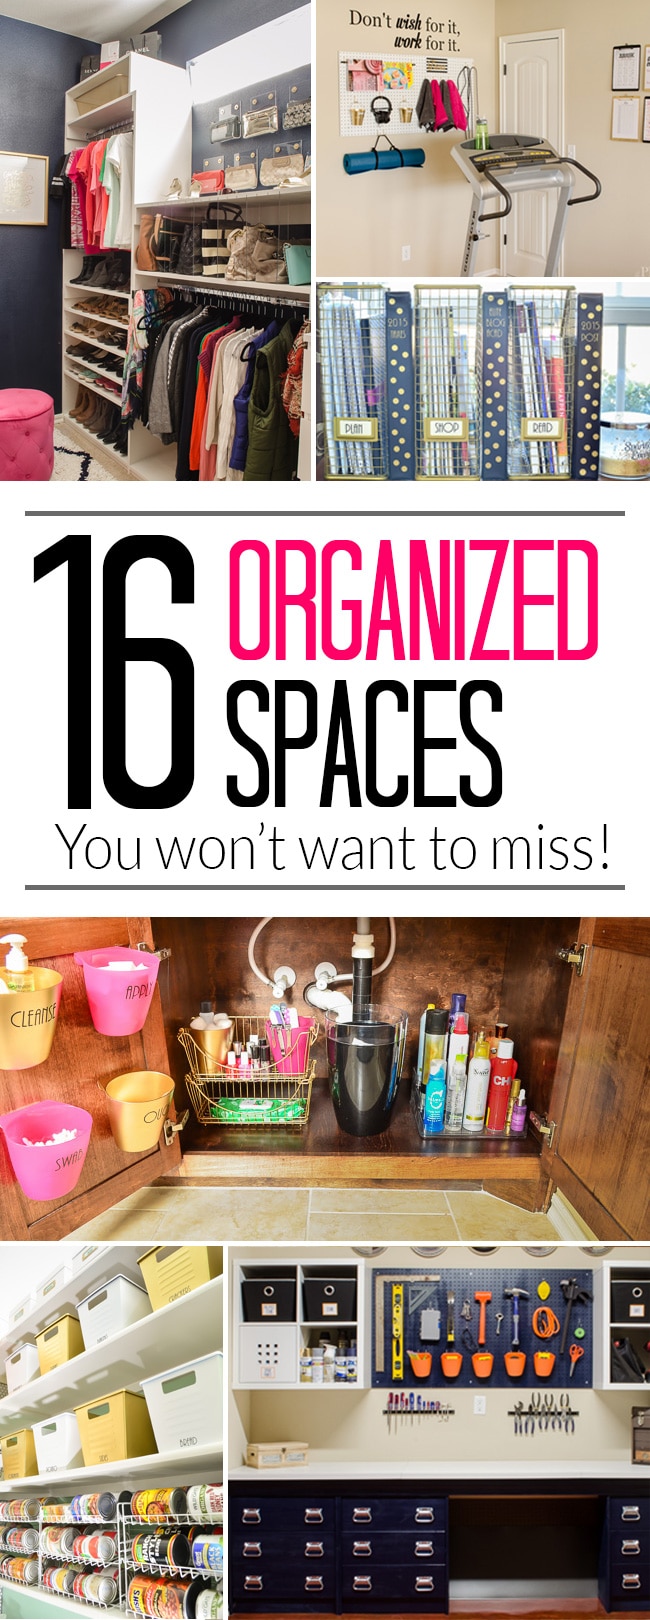 Organize your bathroom, desk, pantry, garage and so much more with the top 16 organizing ideas of 2015 from Polished Habitat.